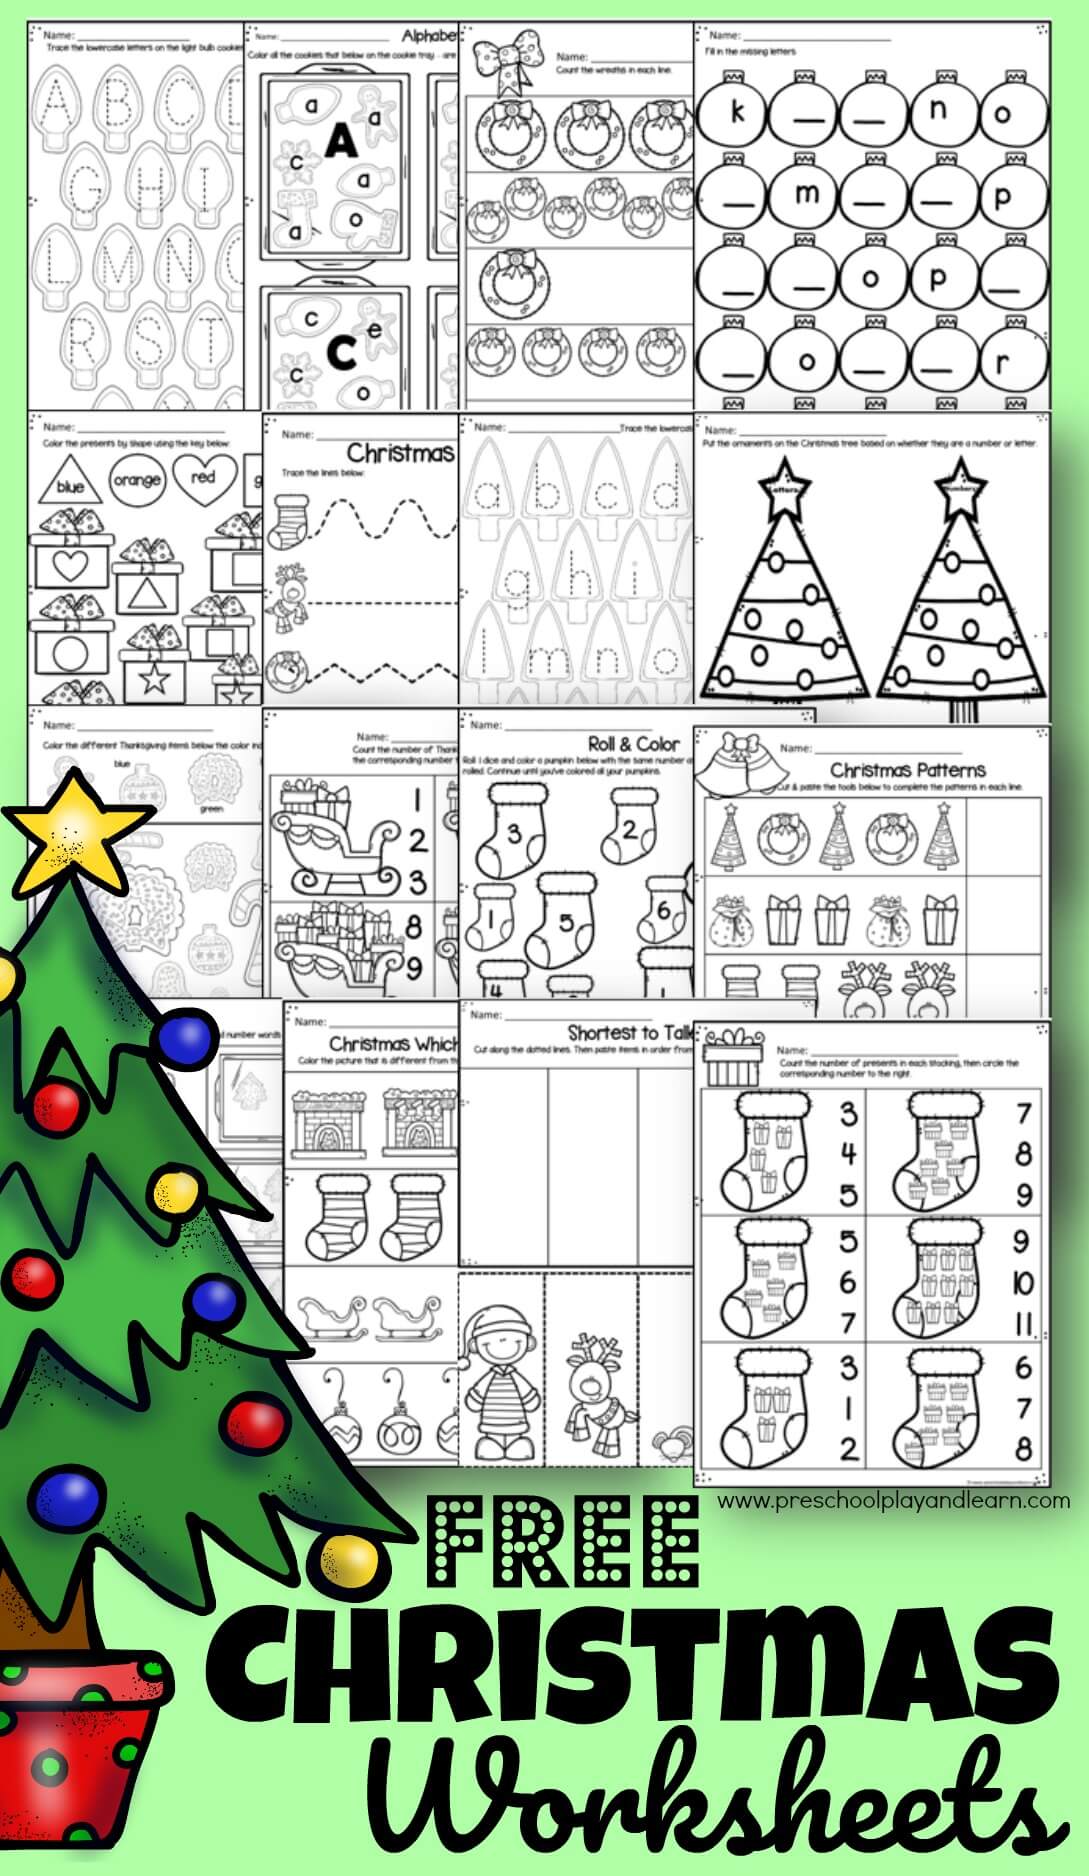 Free Printable Worksheets About Christmas For Preschoolers